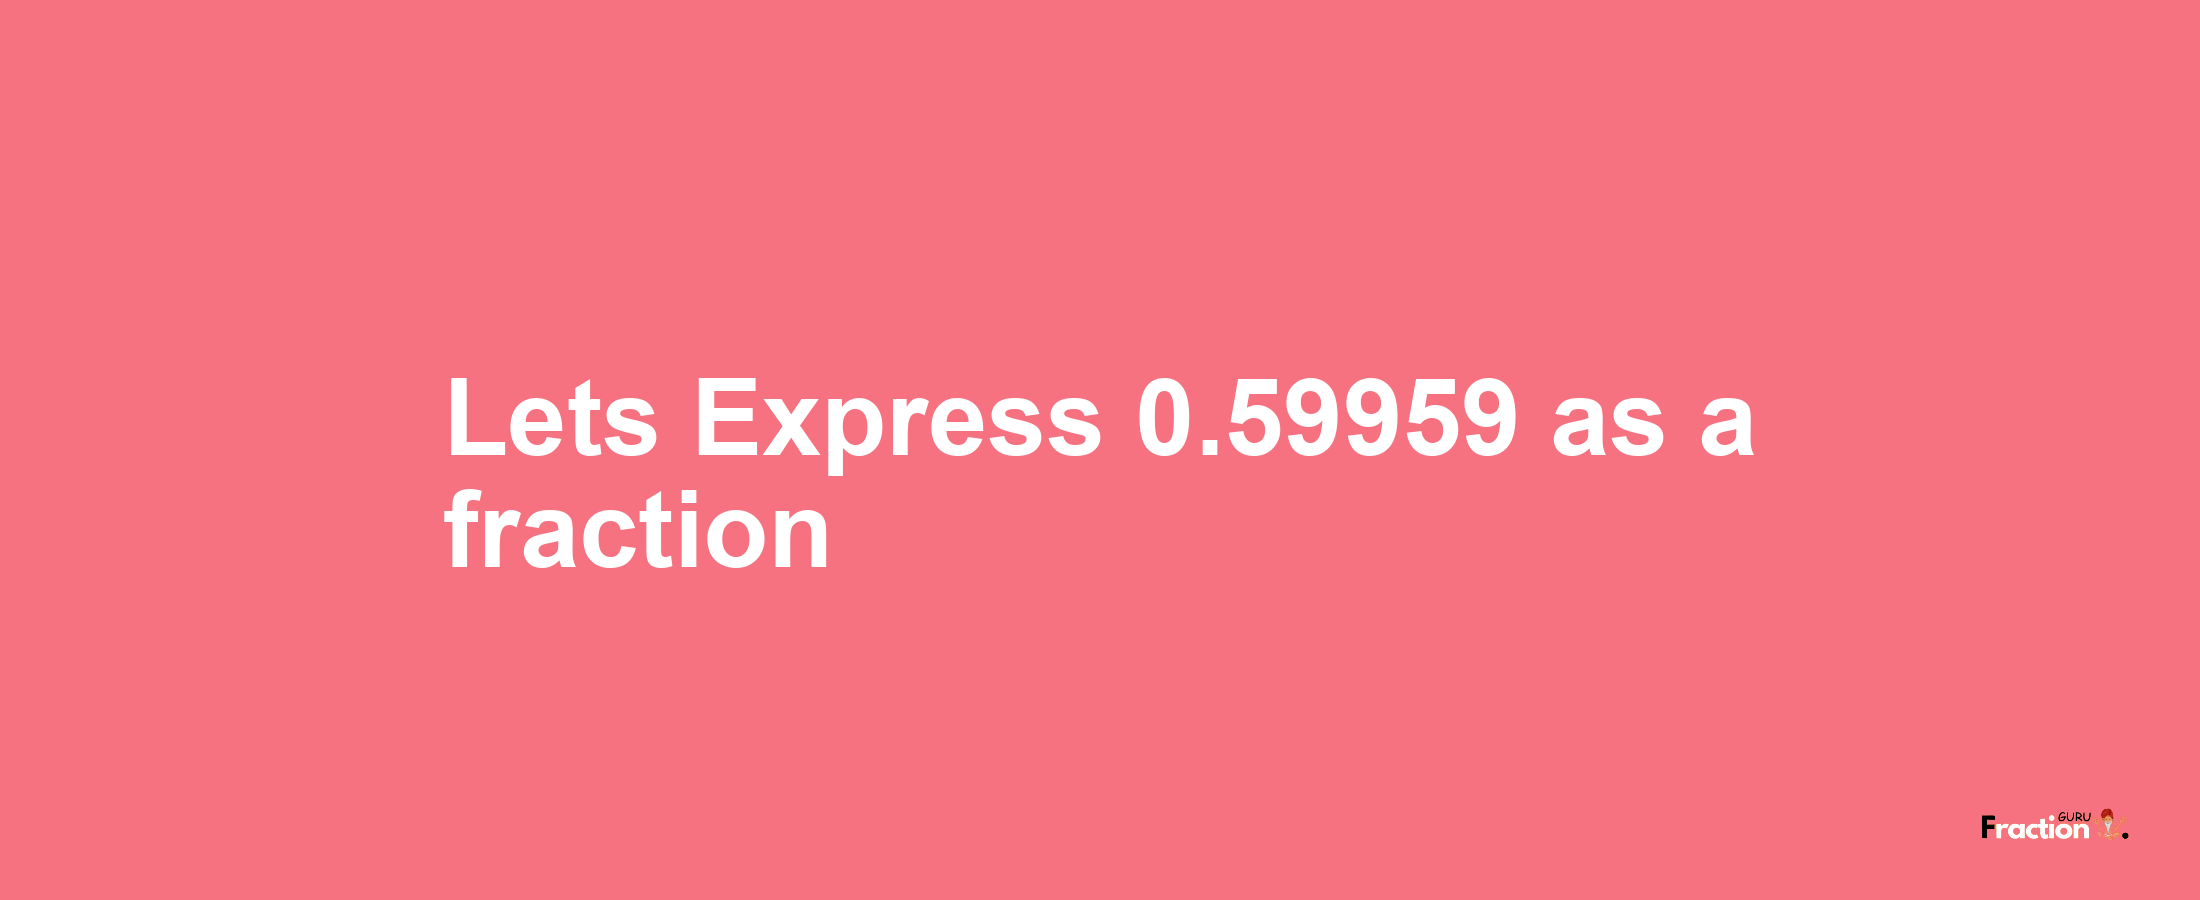 Lets Express 0.59959 as afraction